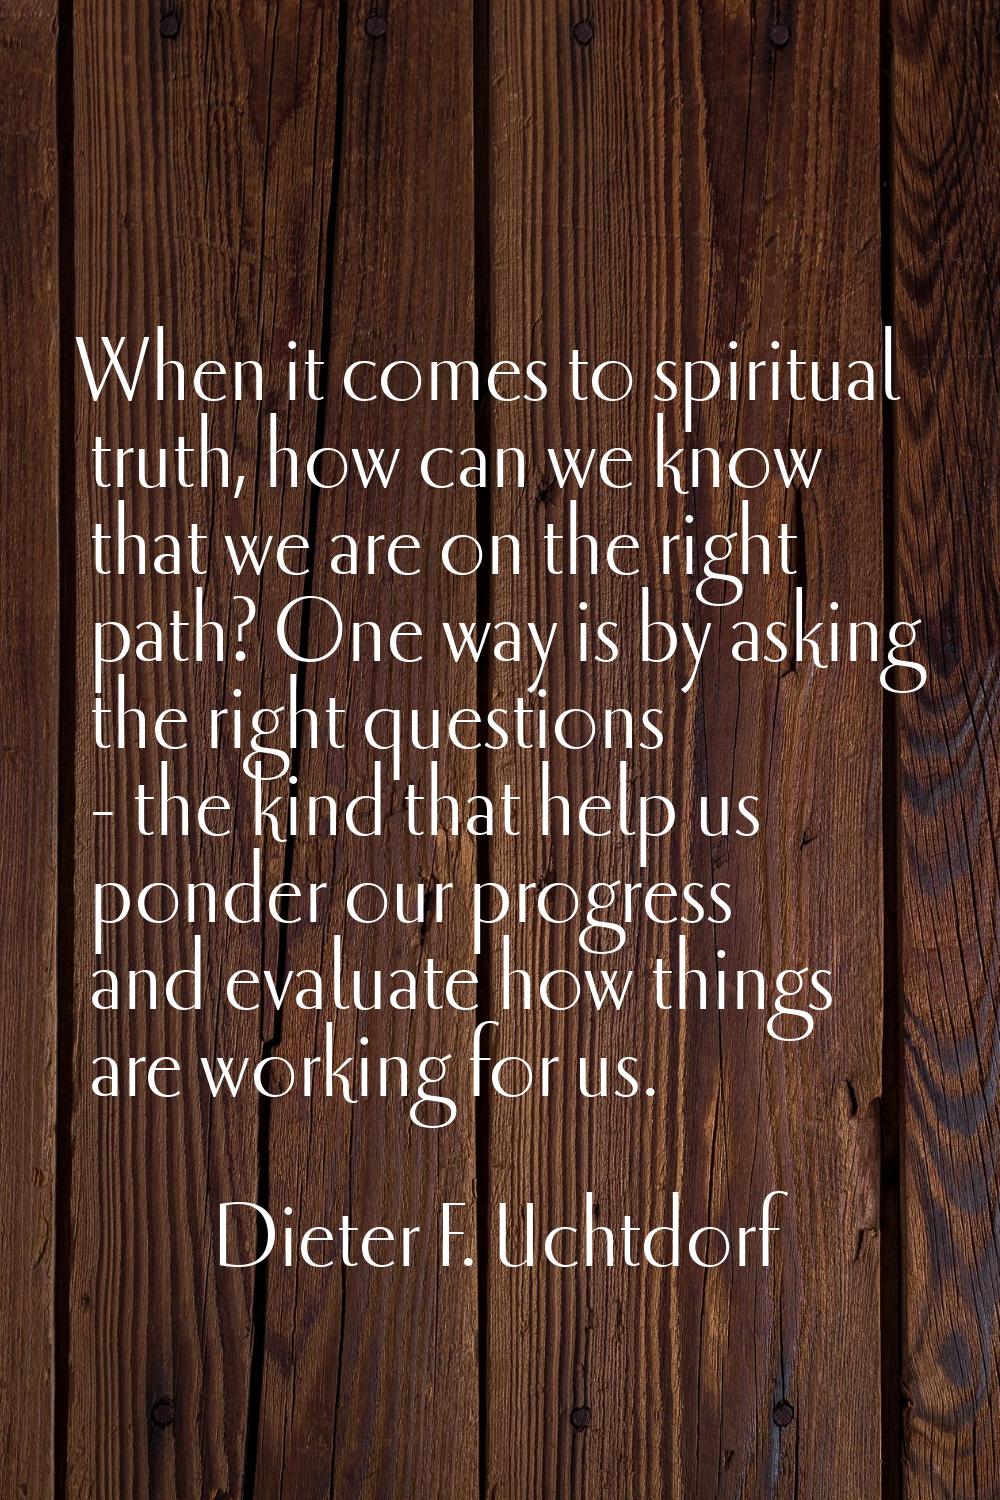 When it comes to spiritual truth, how can we know that we are on the right path? One way is by aski